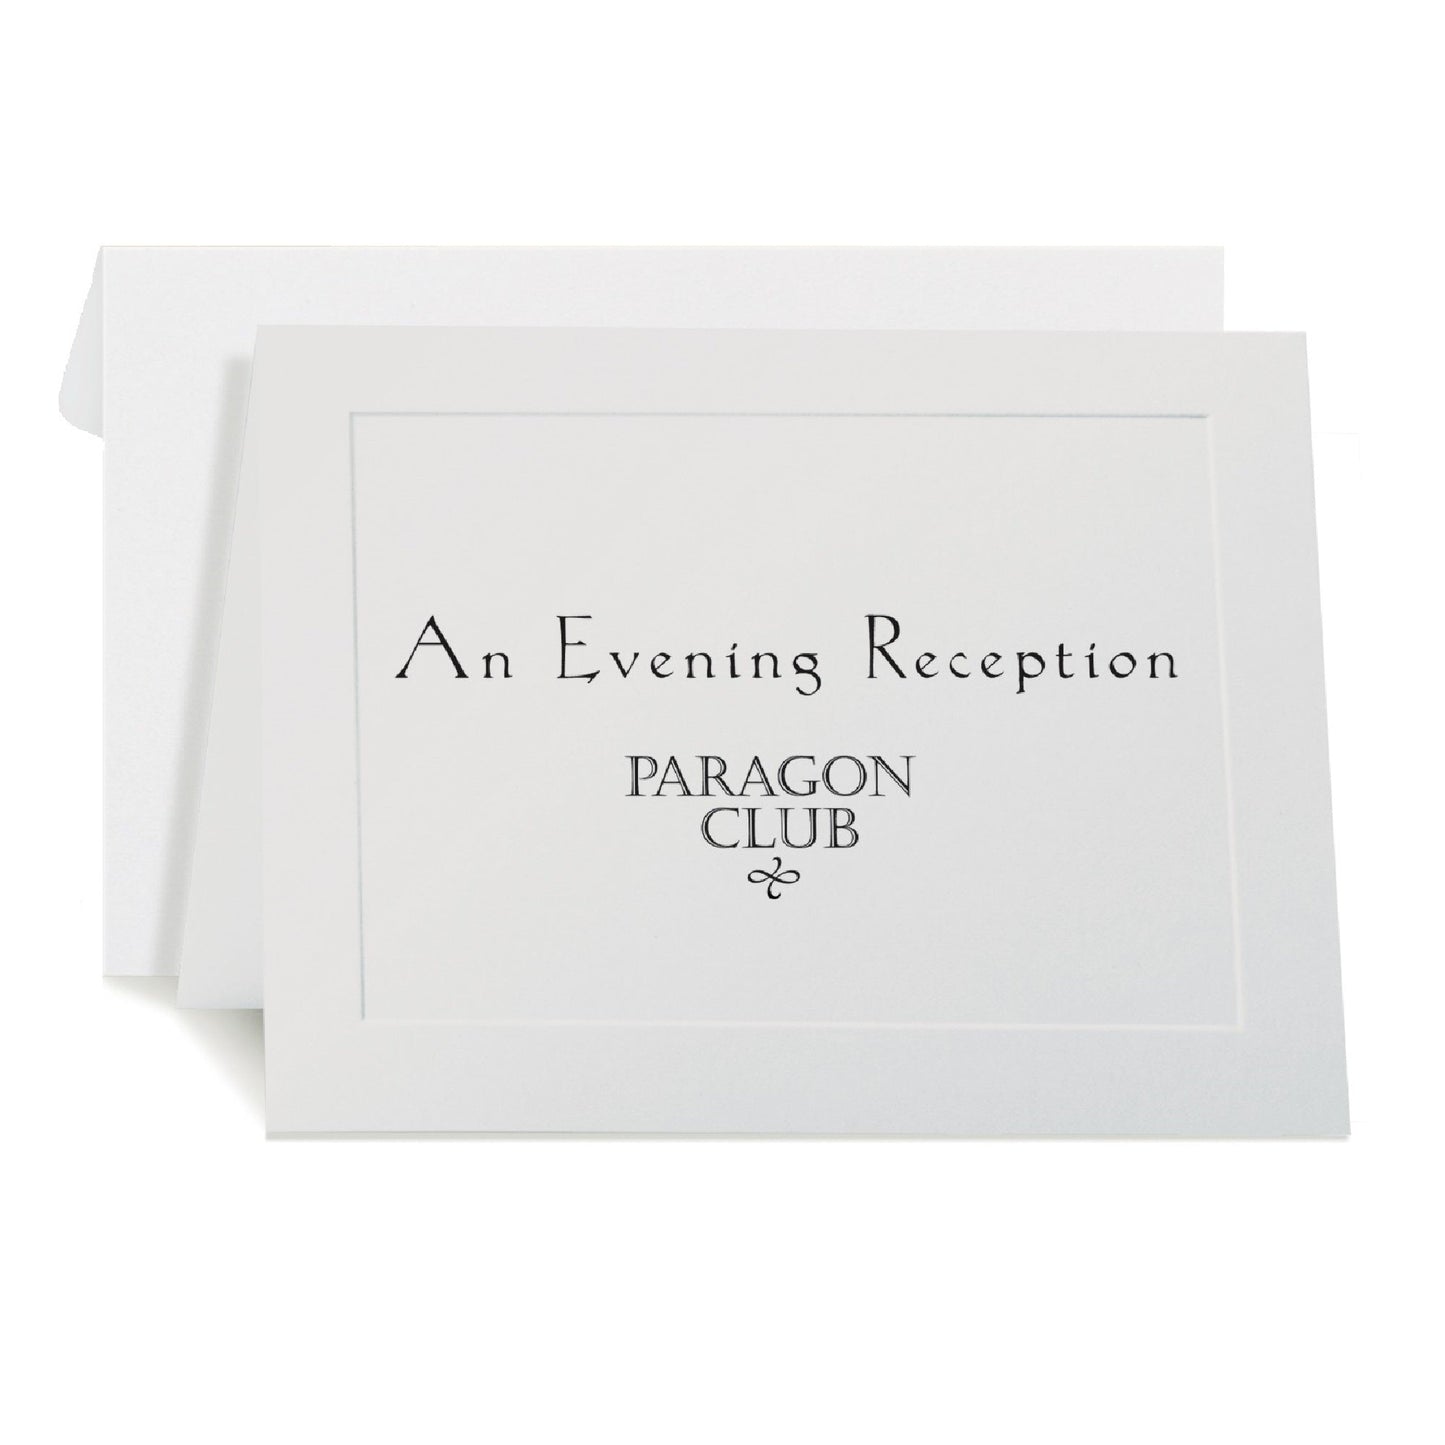 St. James® Overtures® Traditional Embossed Note Cards, White, 40 sets